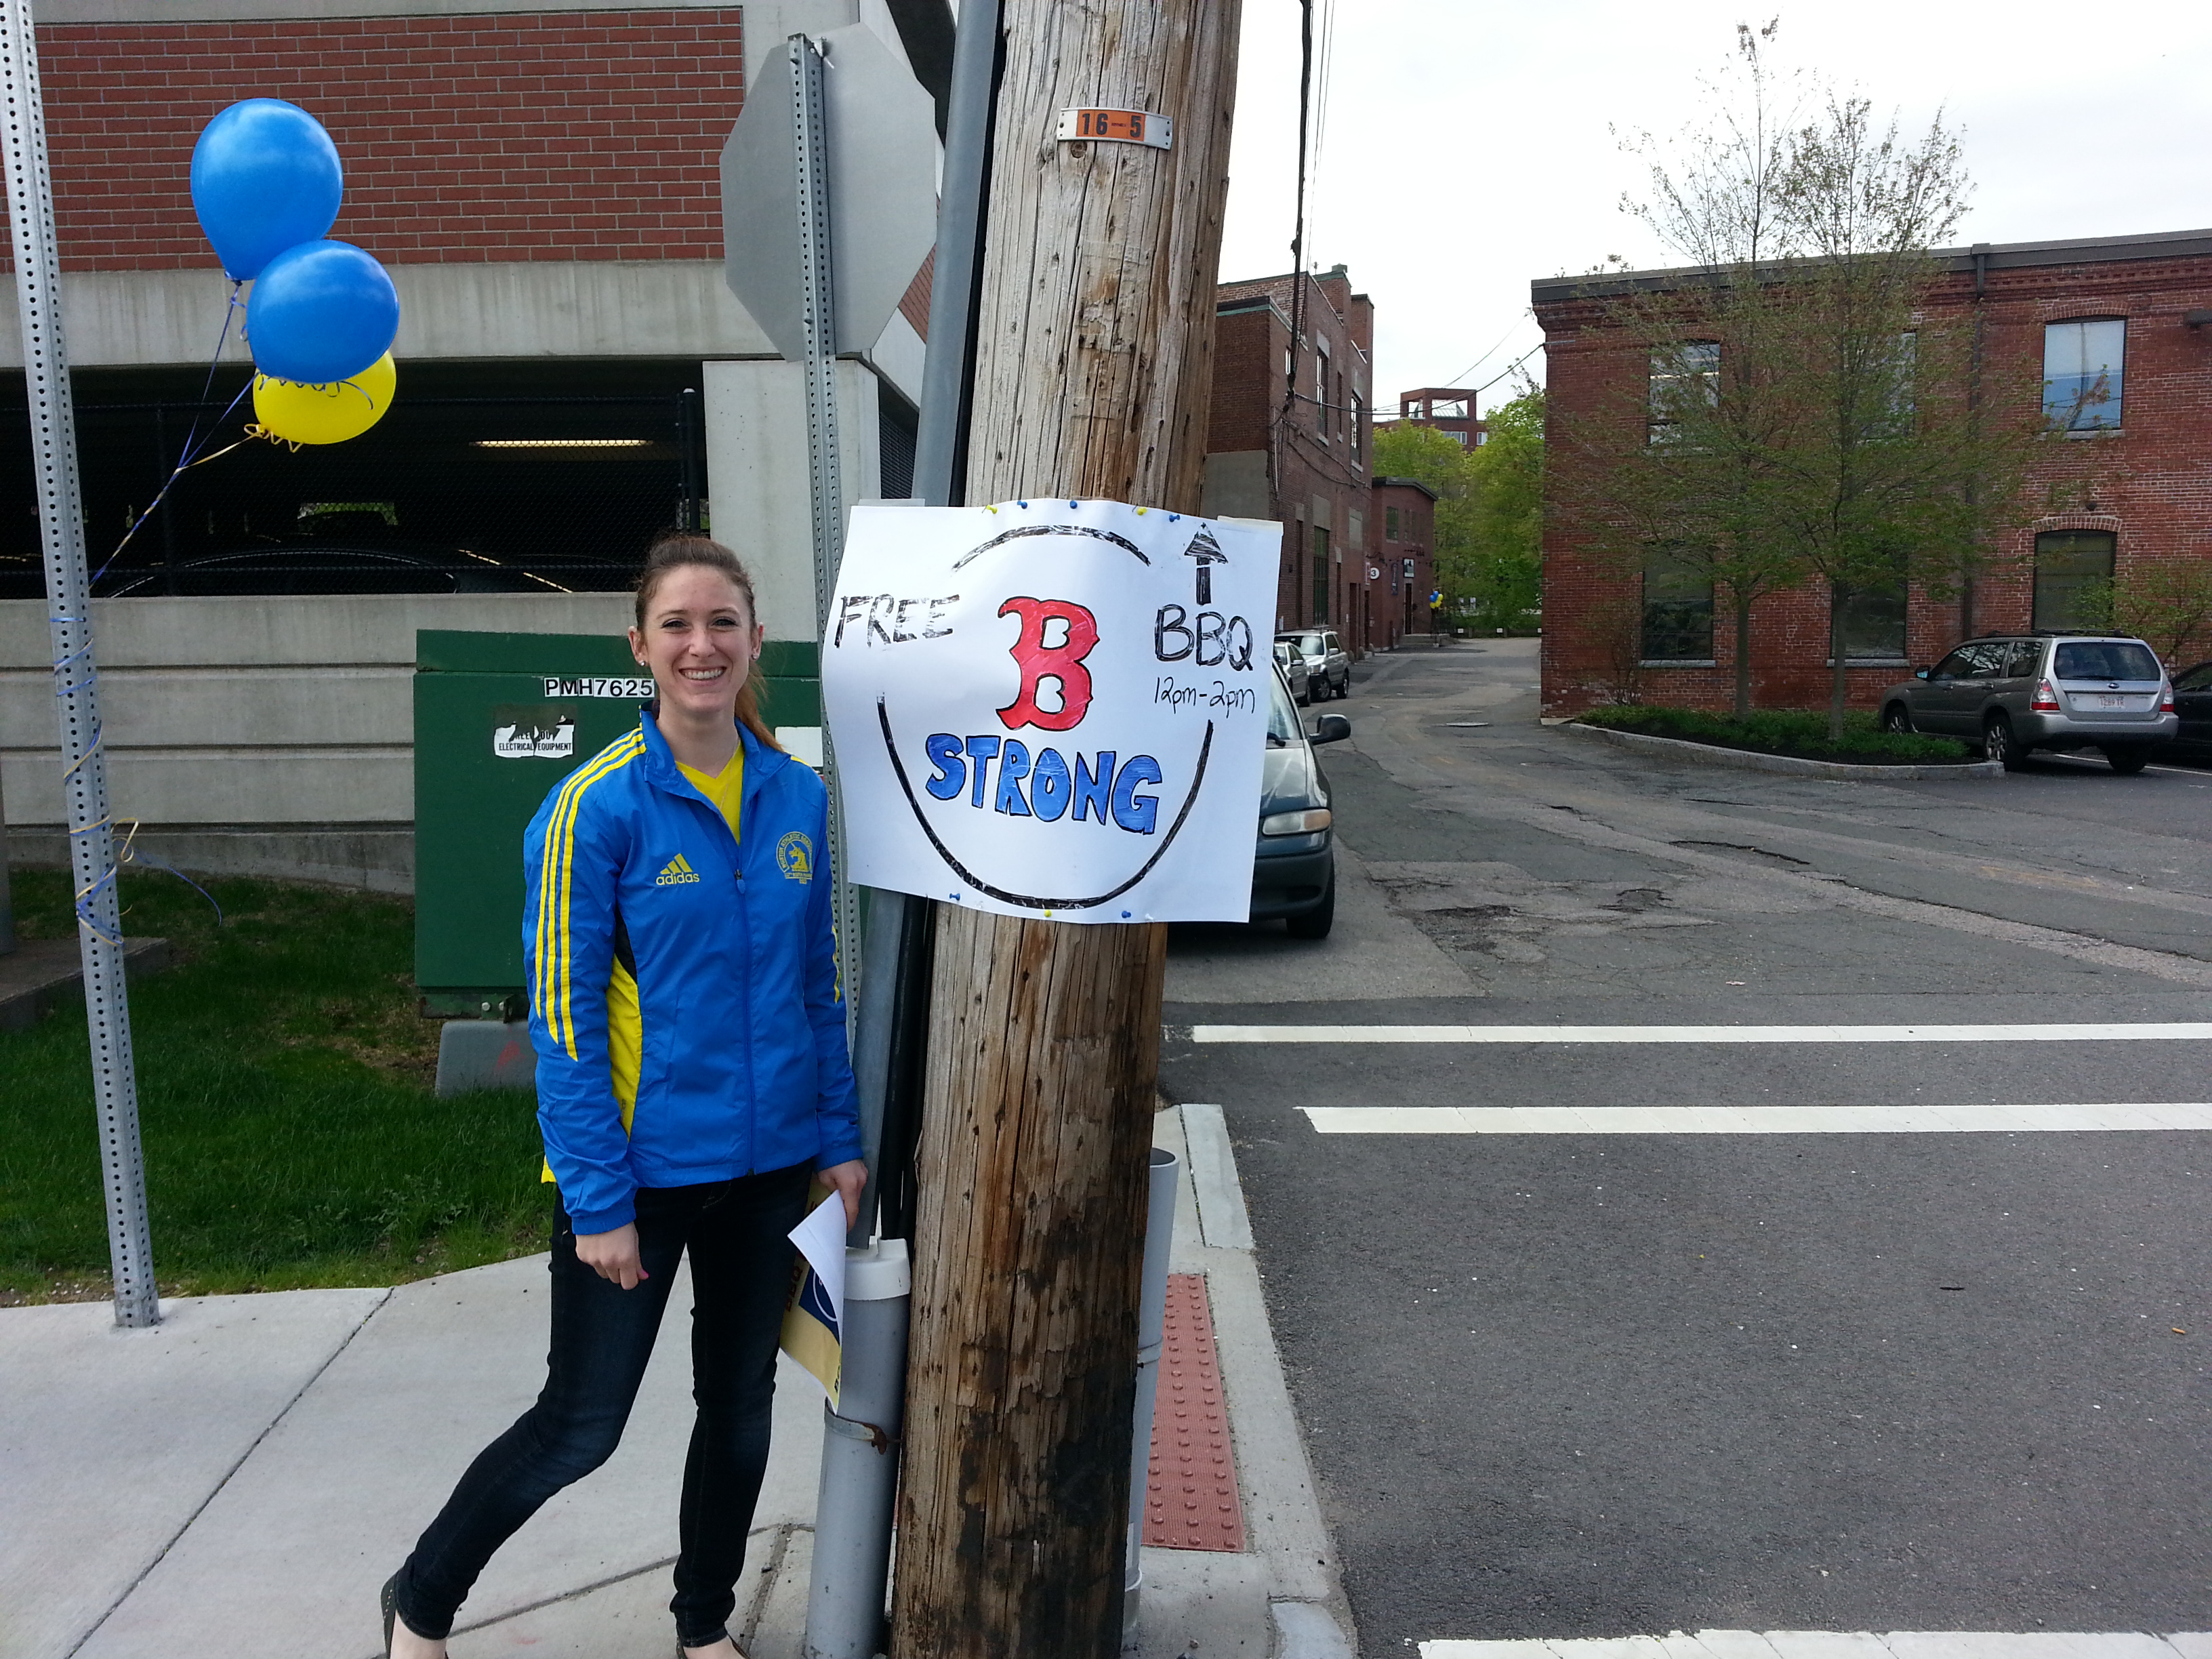 Outfitting the neighborhood for the Boston Strong BBQ